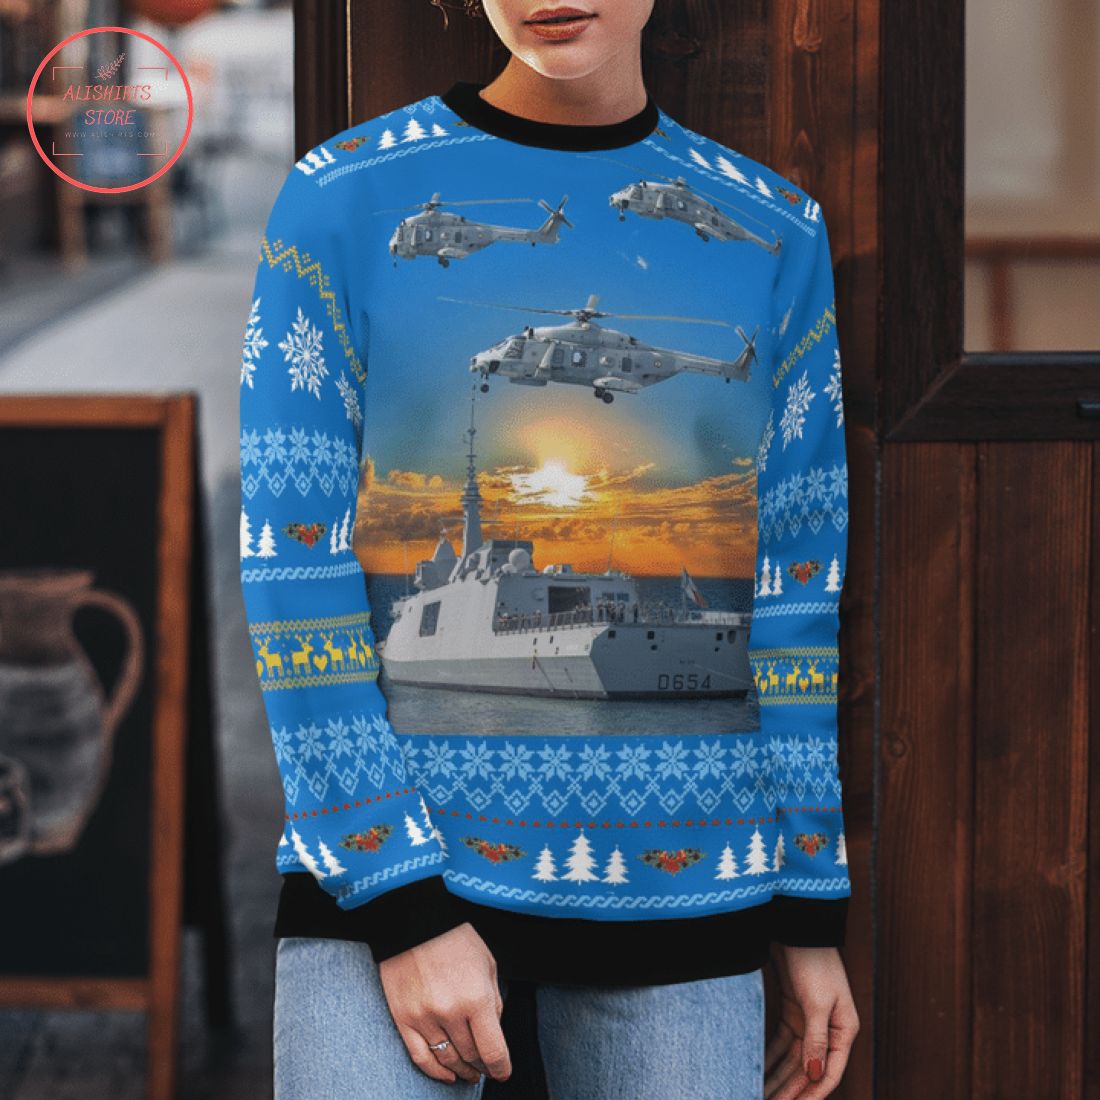 French Navy Ship Auvergne & Nh90 Helicopter Ugly Christmas Sweater